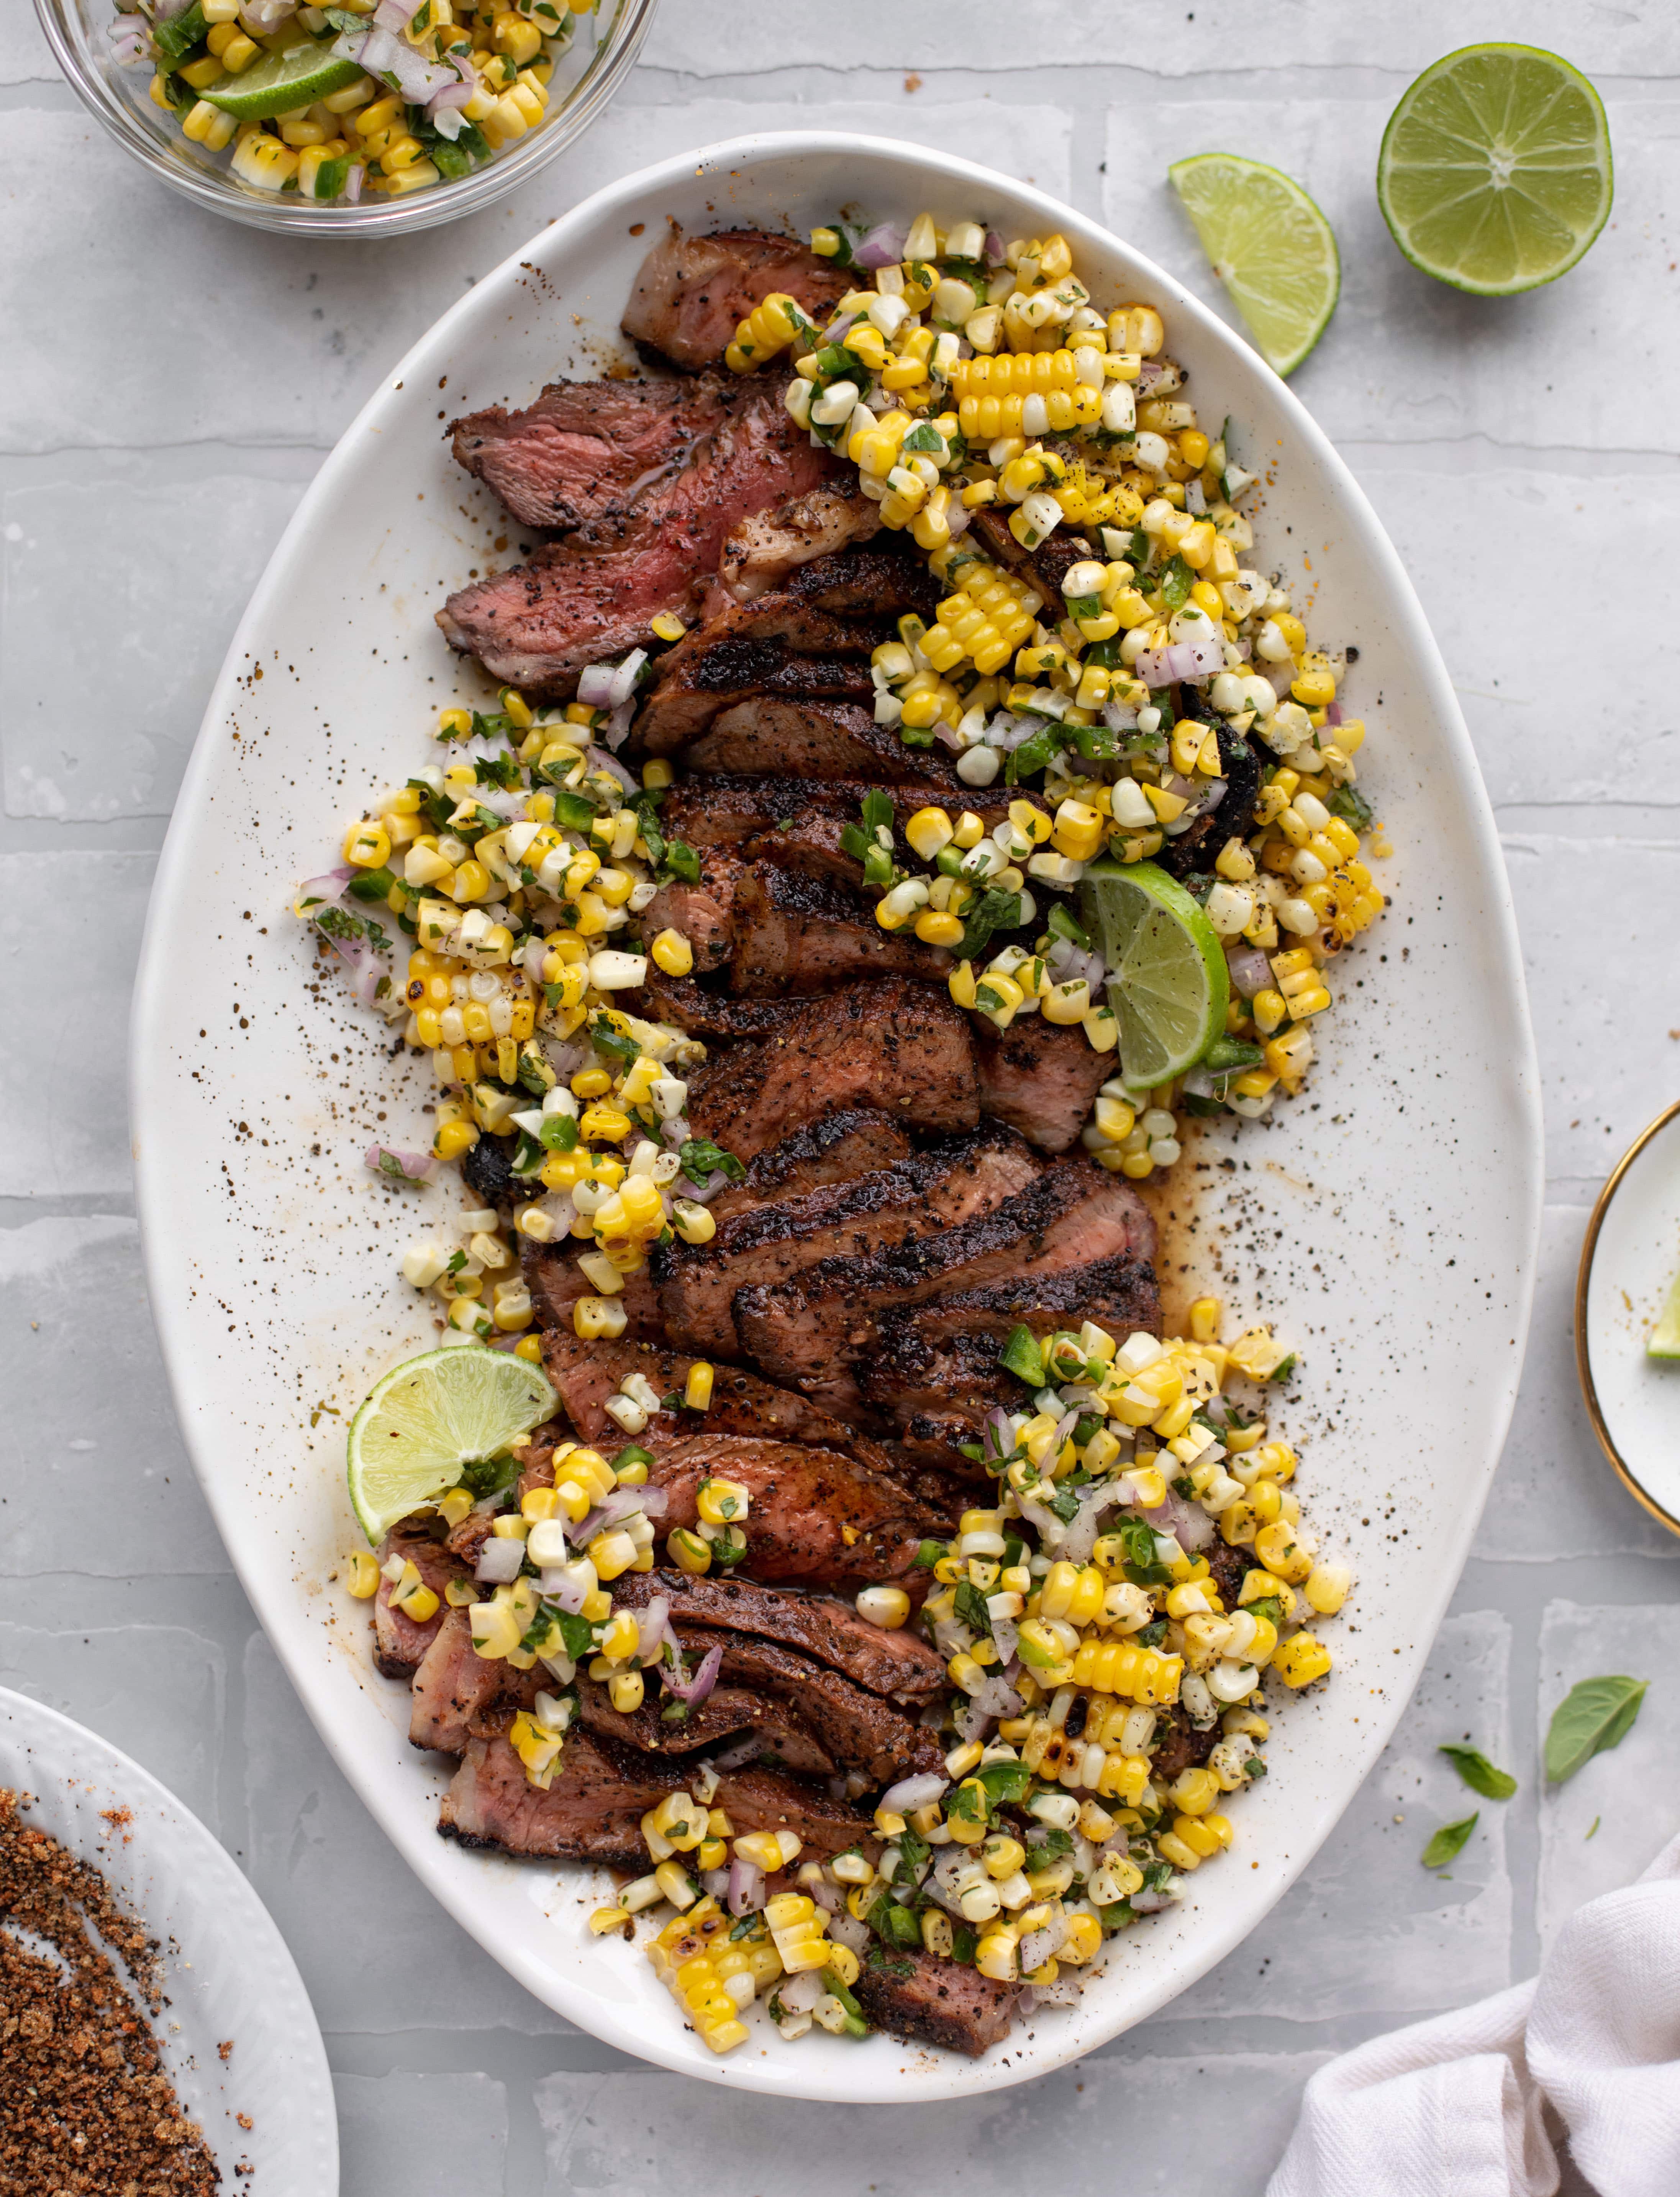 This coffee crusted steak is incredibly flavorful! Topped with a fresh and bright herbed corn salsa, it's the perfect meal to kick off summer.